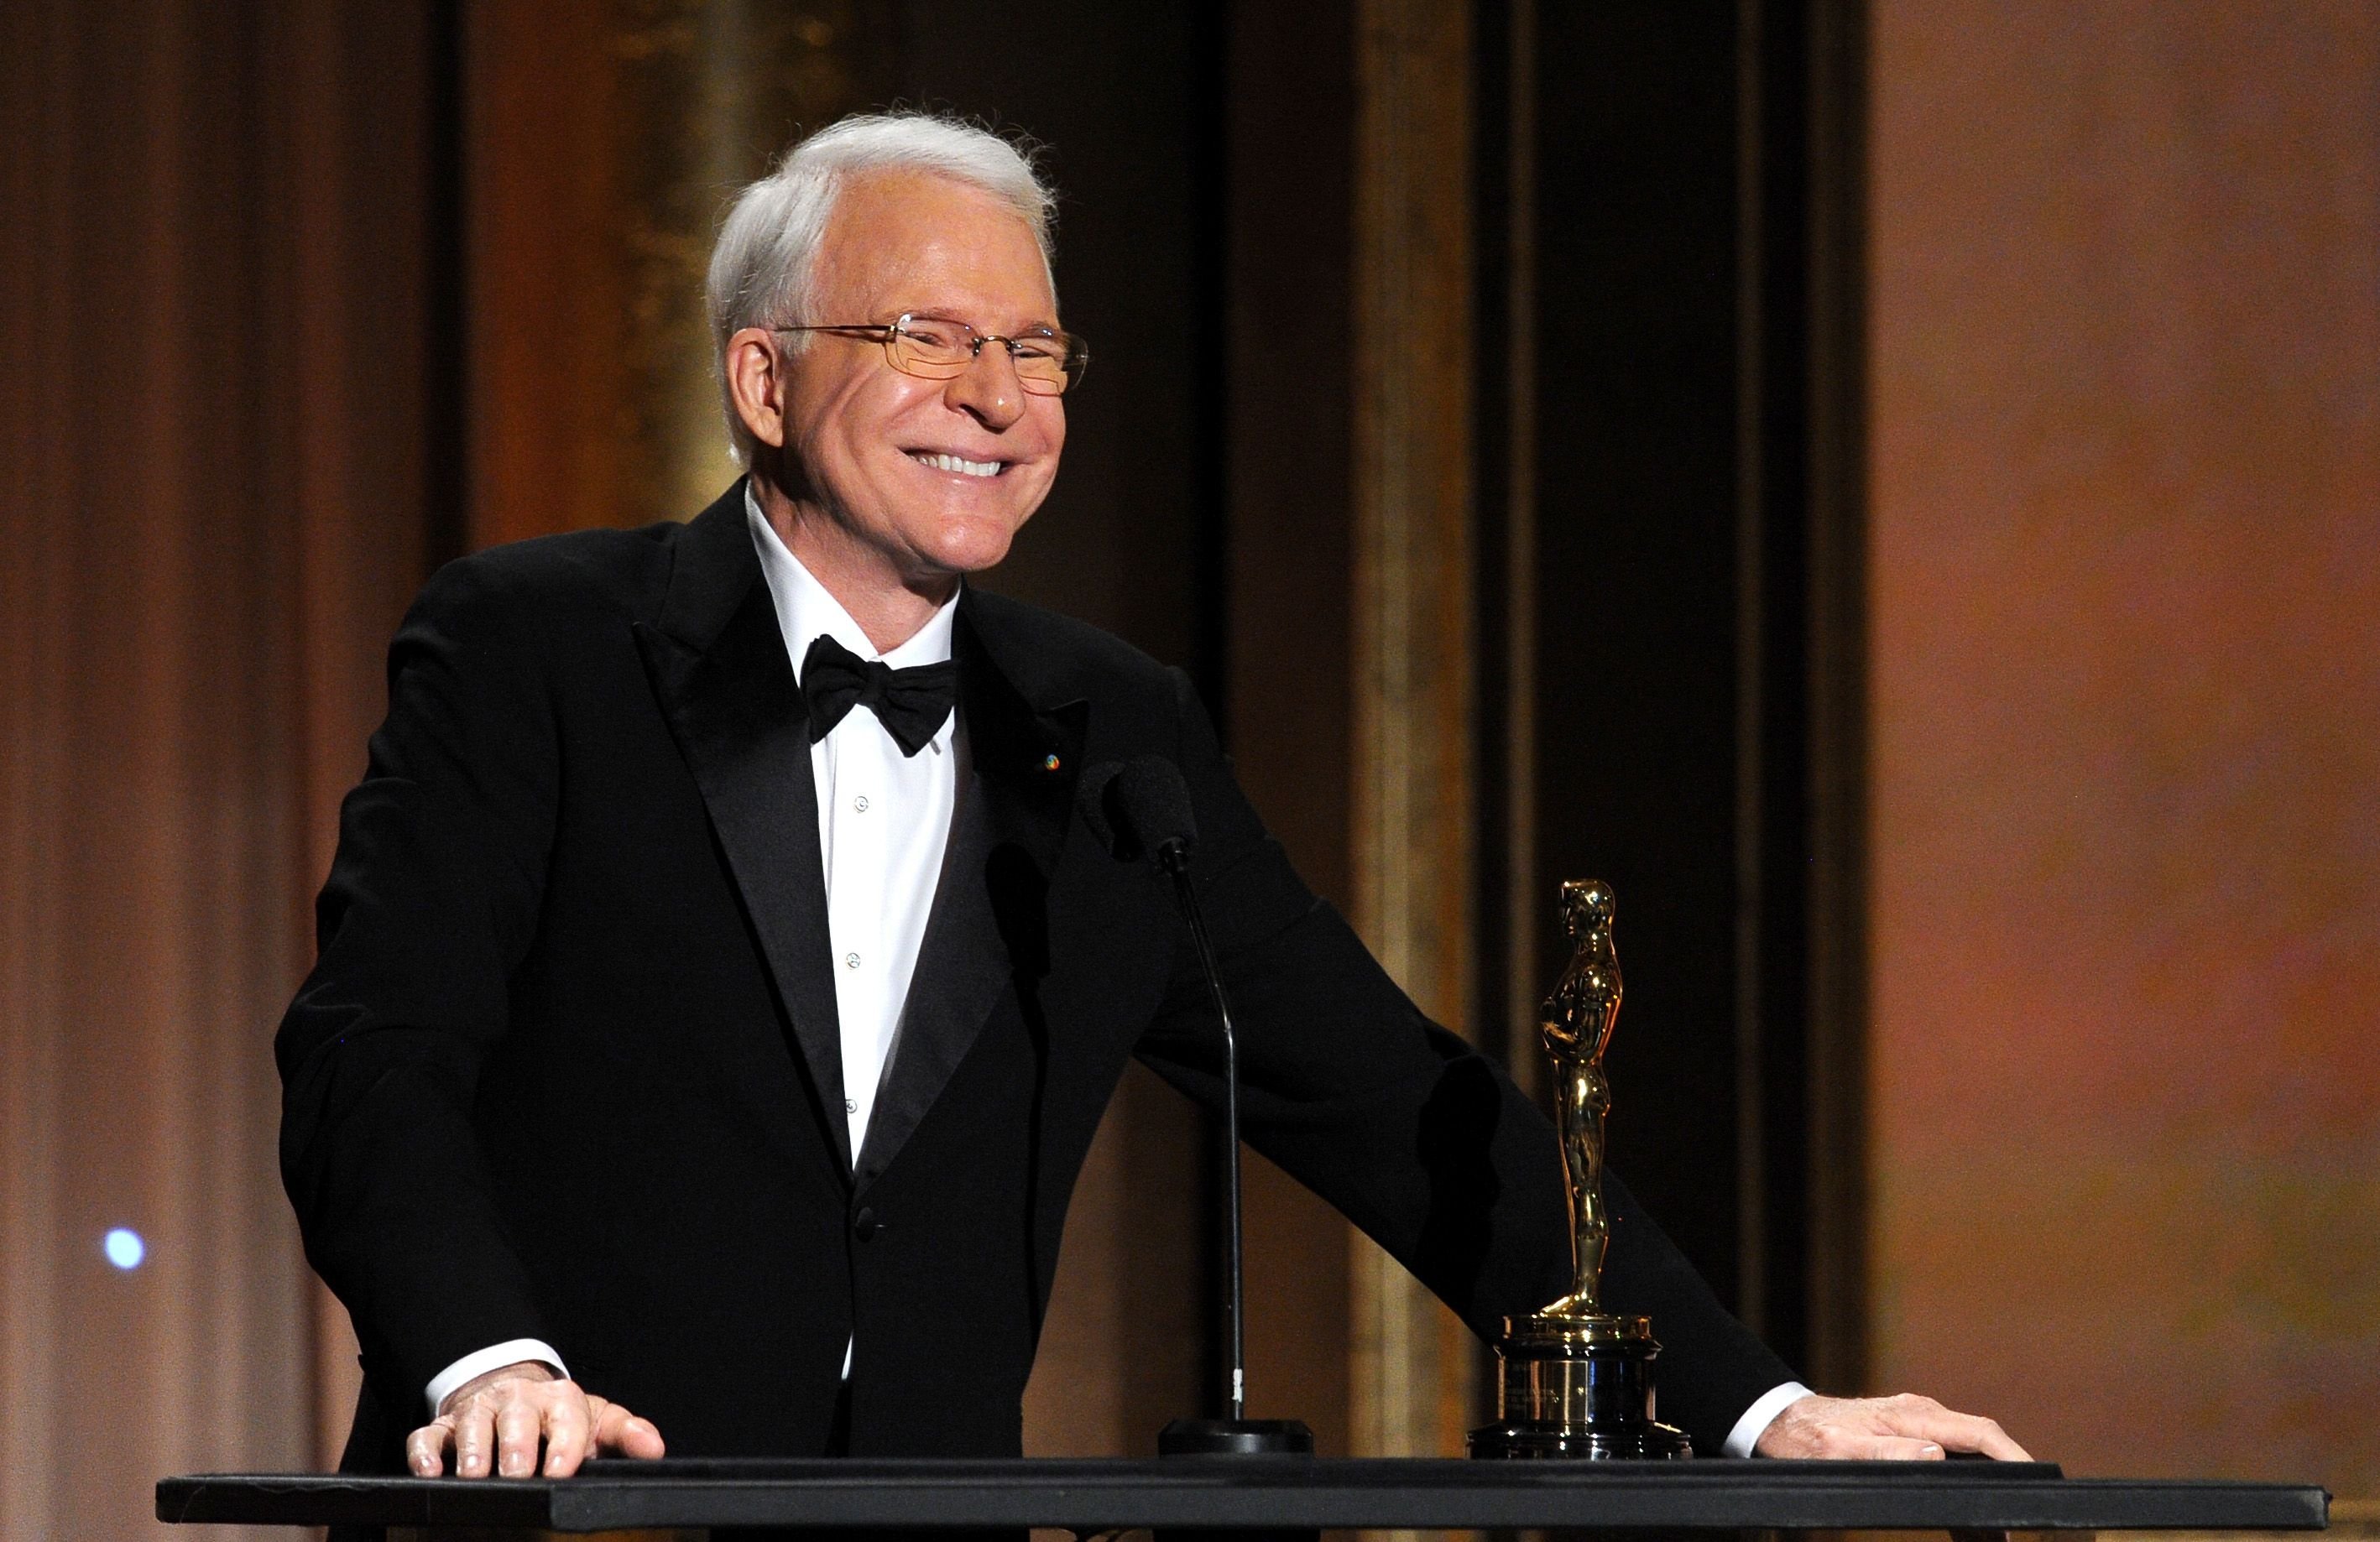 Steve Martin accepts honorary award onstage during the Academy of Motion Picture Arts and Sciences' Governors Awards. | Source: Getty Images